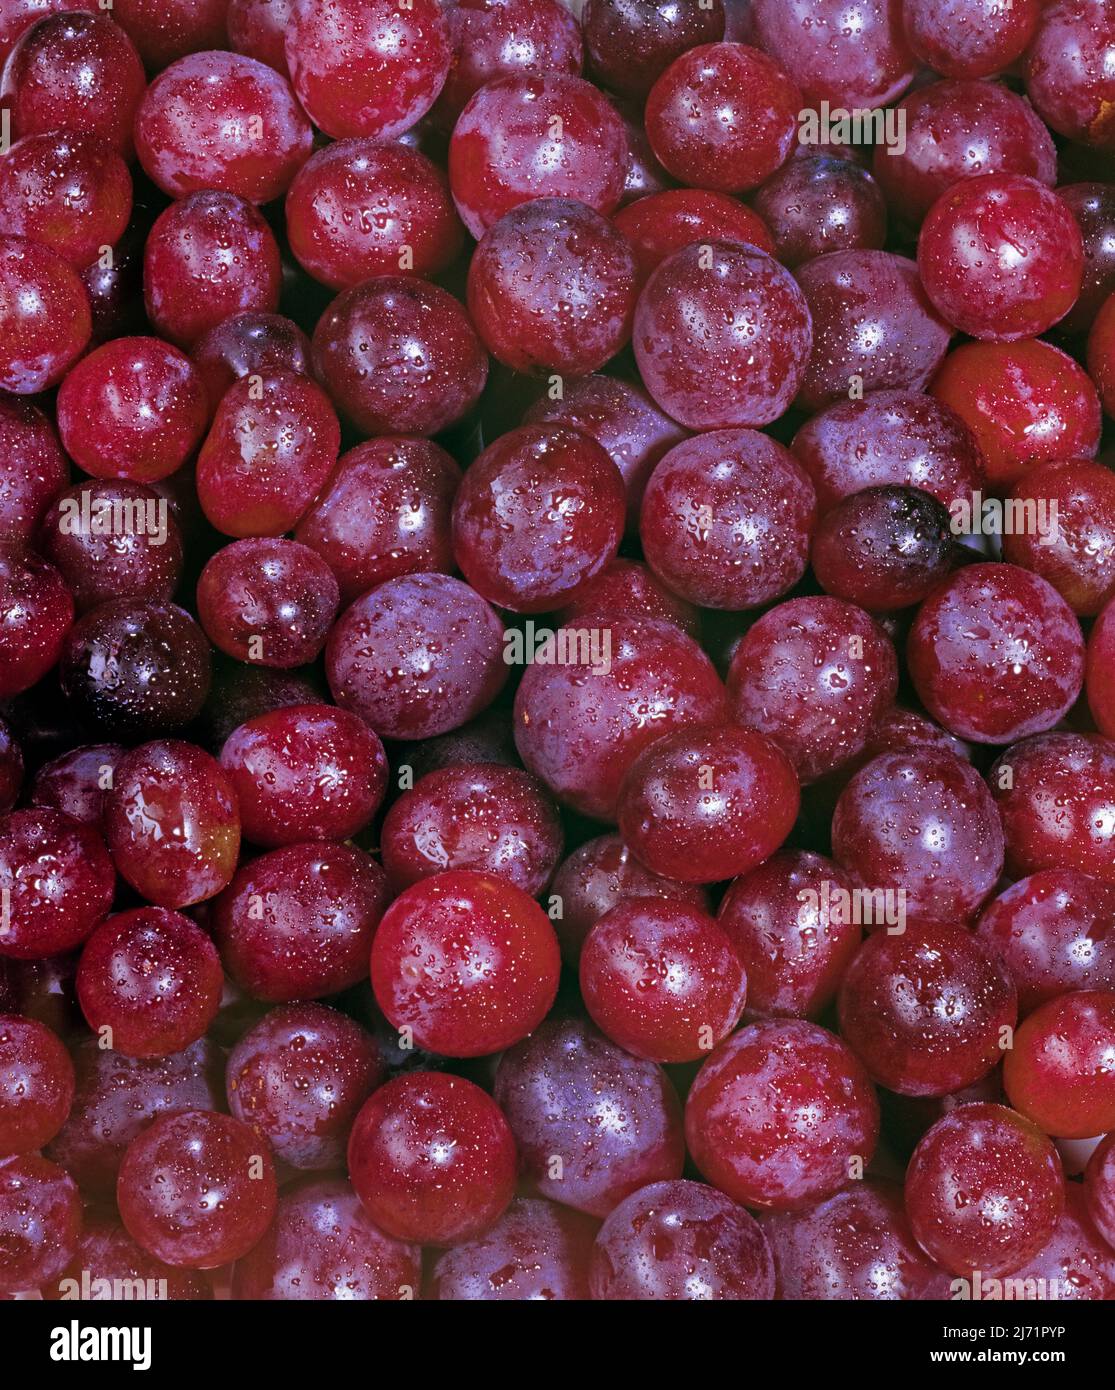 An array of fresh grapes. Image from 4x5 inch film transparency. Stock Photo